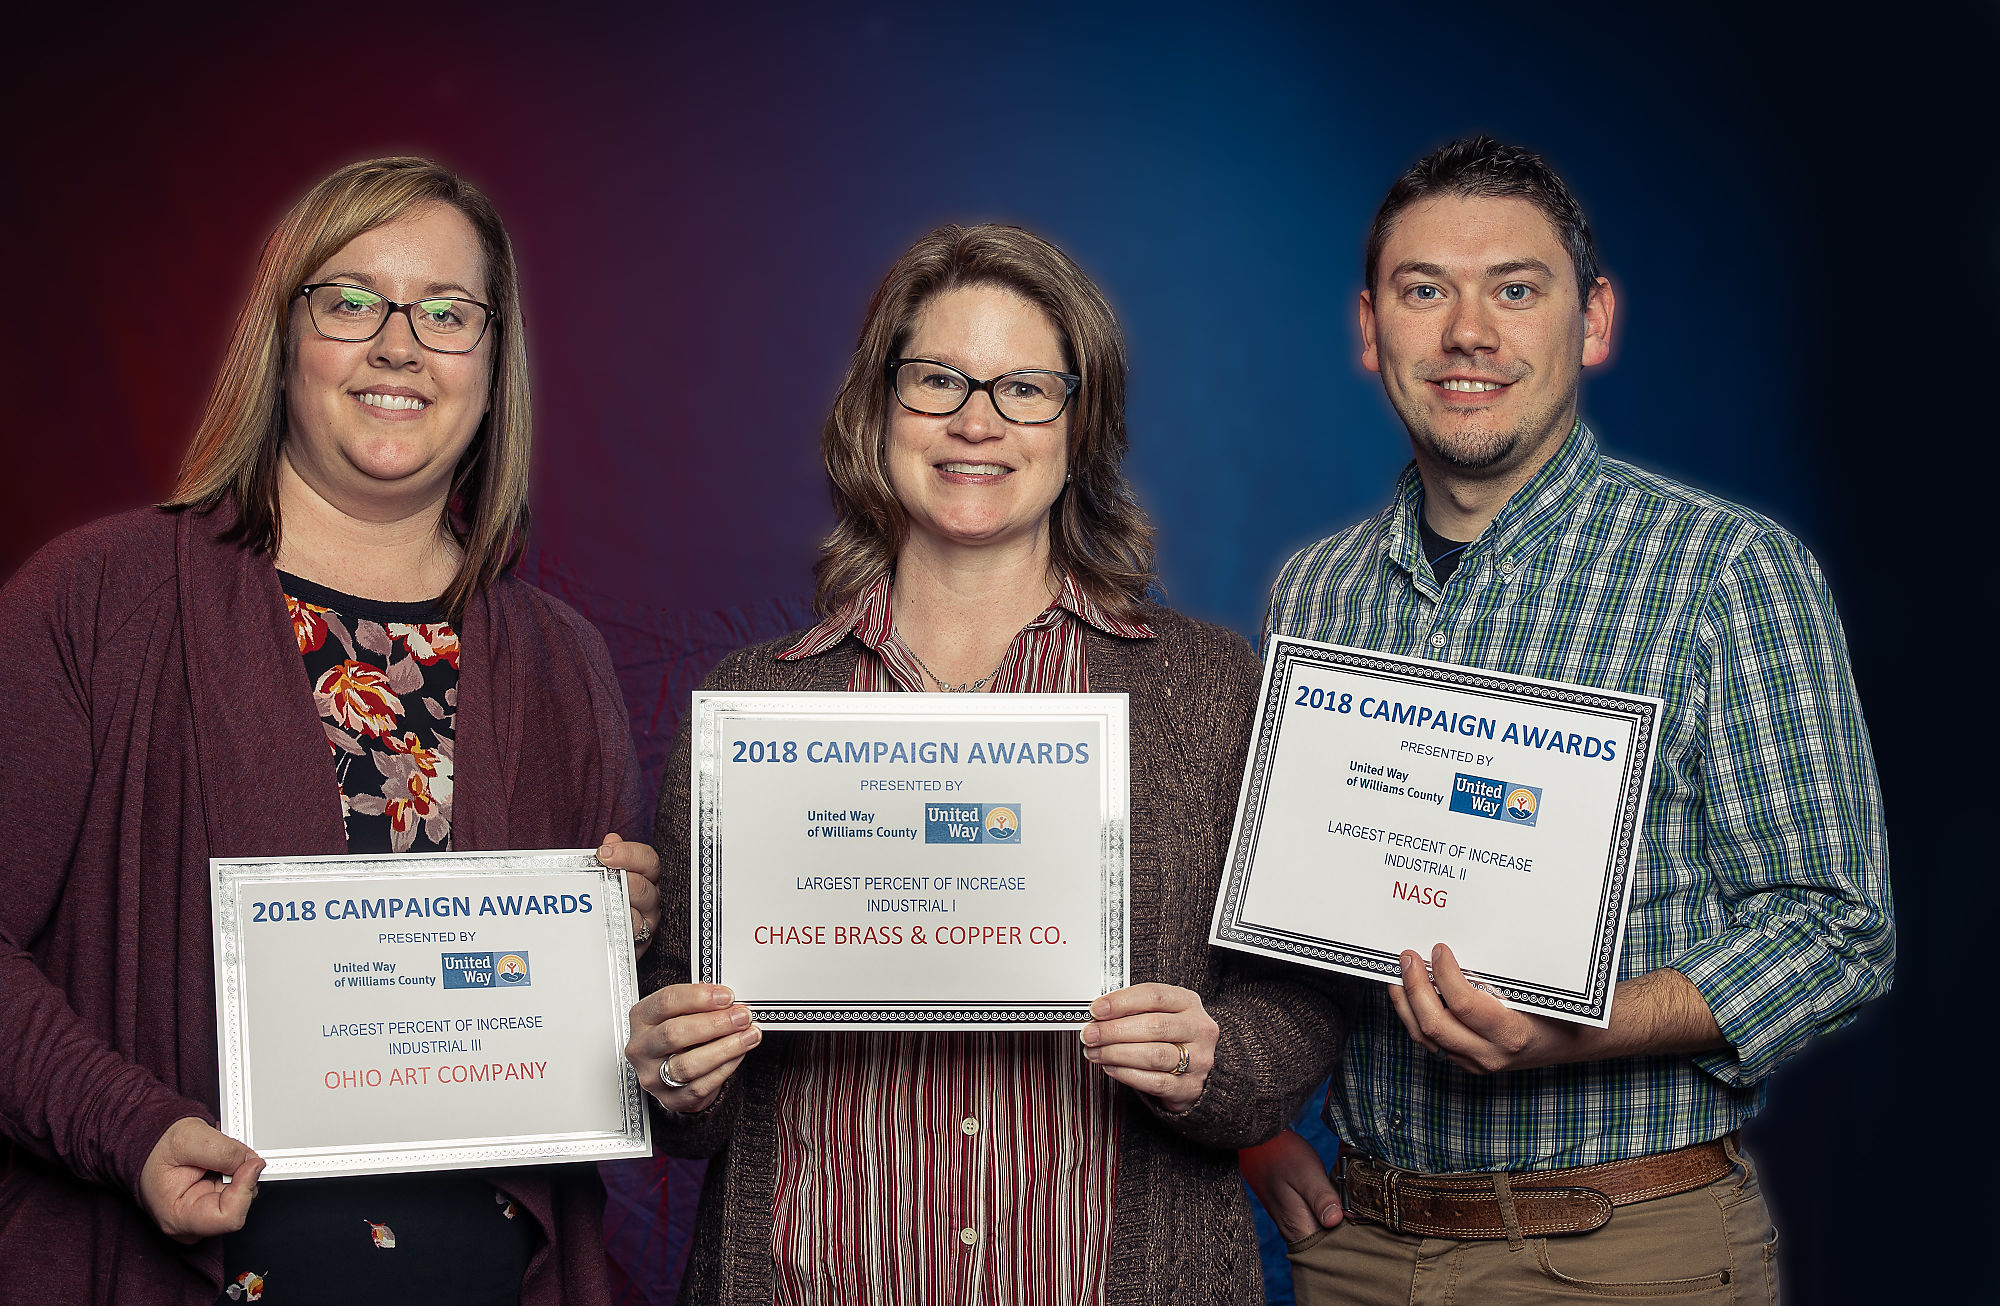 LARGEST PERCENT OF INCREASE Industrial III - Michelle Gibbs for Ohio Art Industrial I - Heidi Taylor for Chase Brass & Copper Co. Industrial II - Johnny Schwartz for NASG